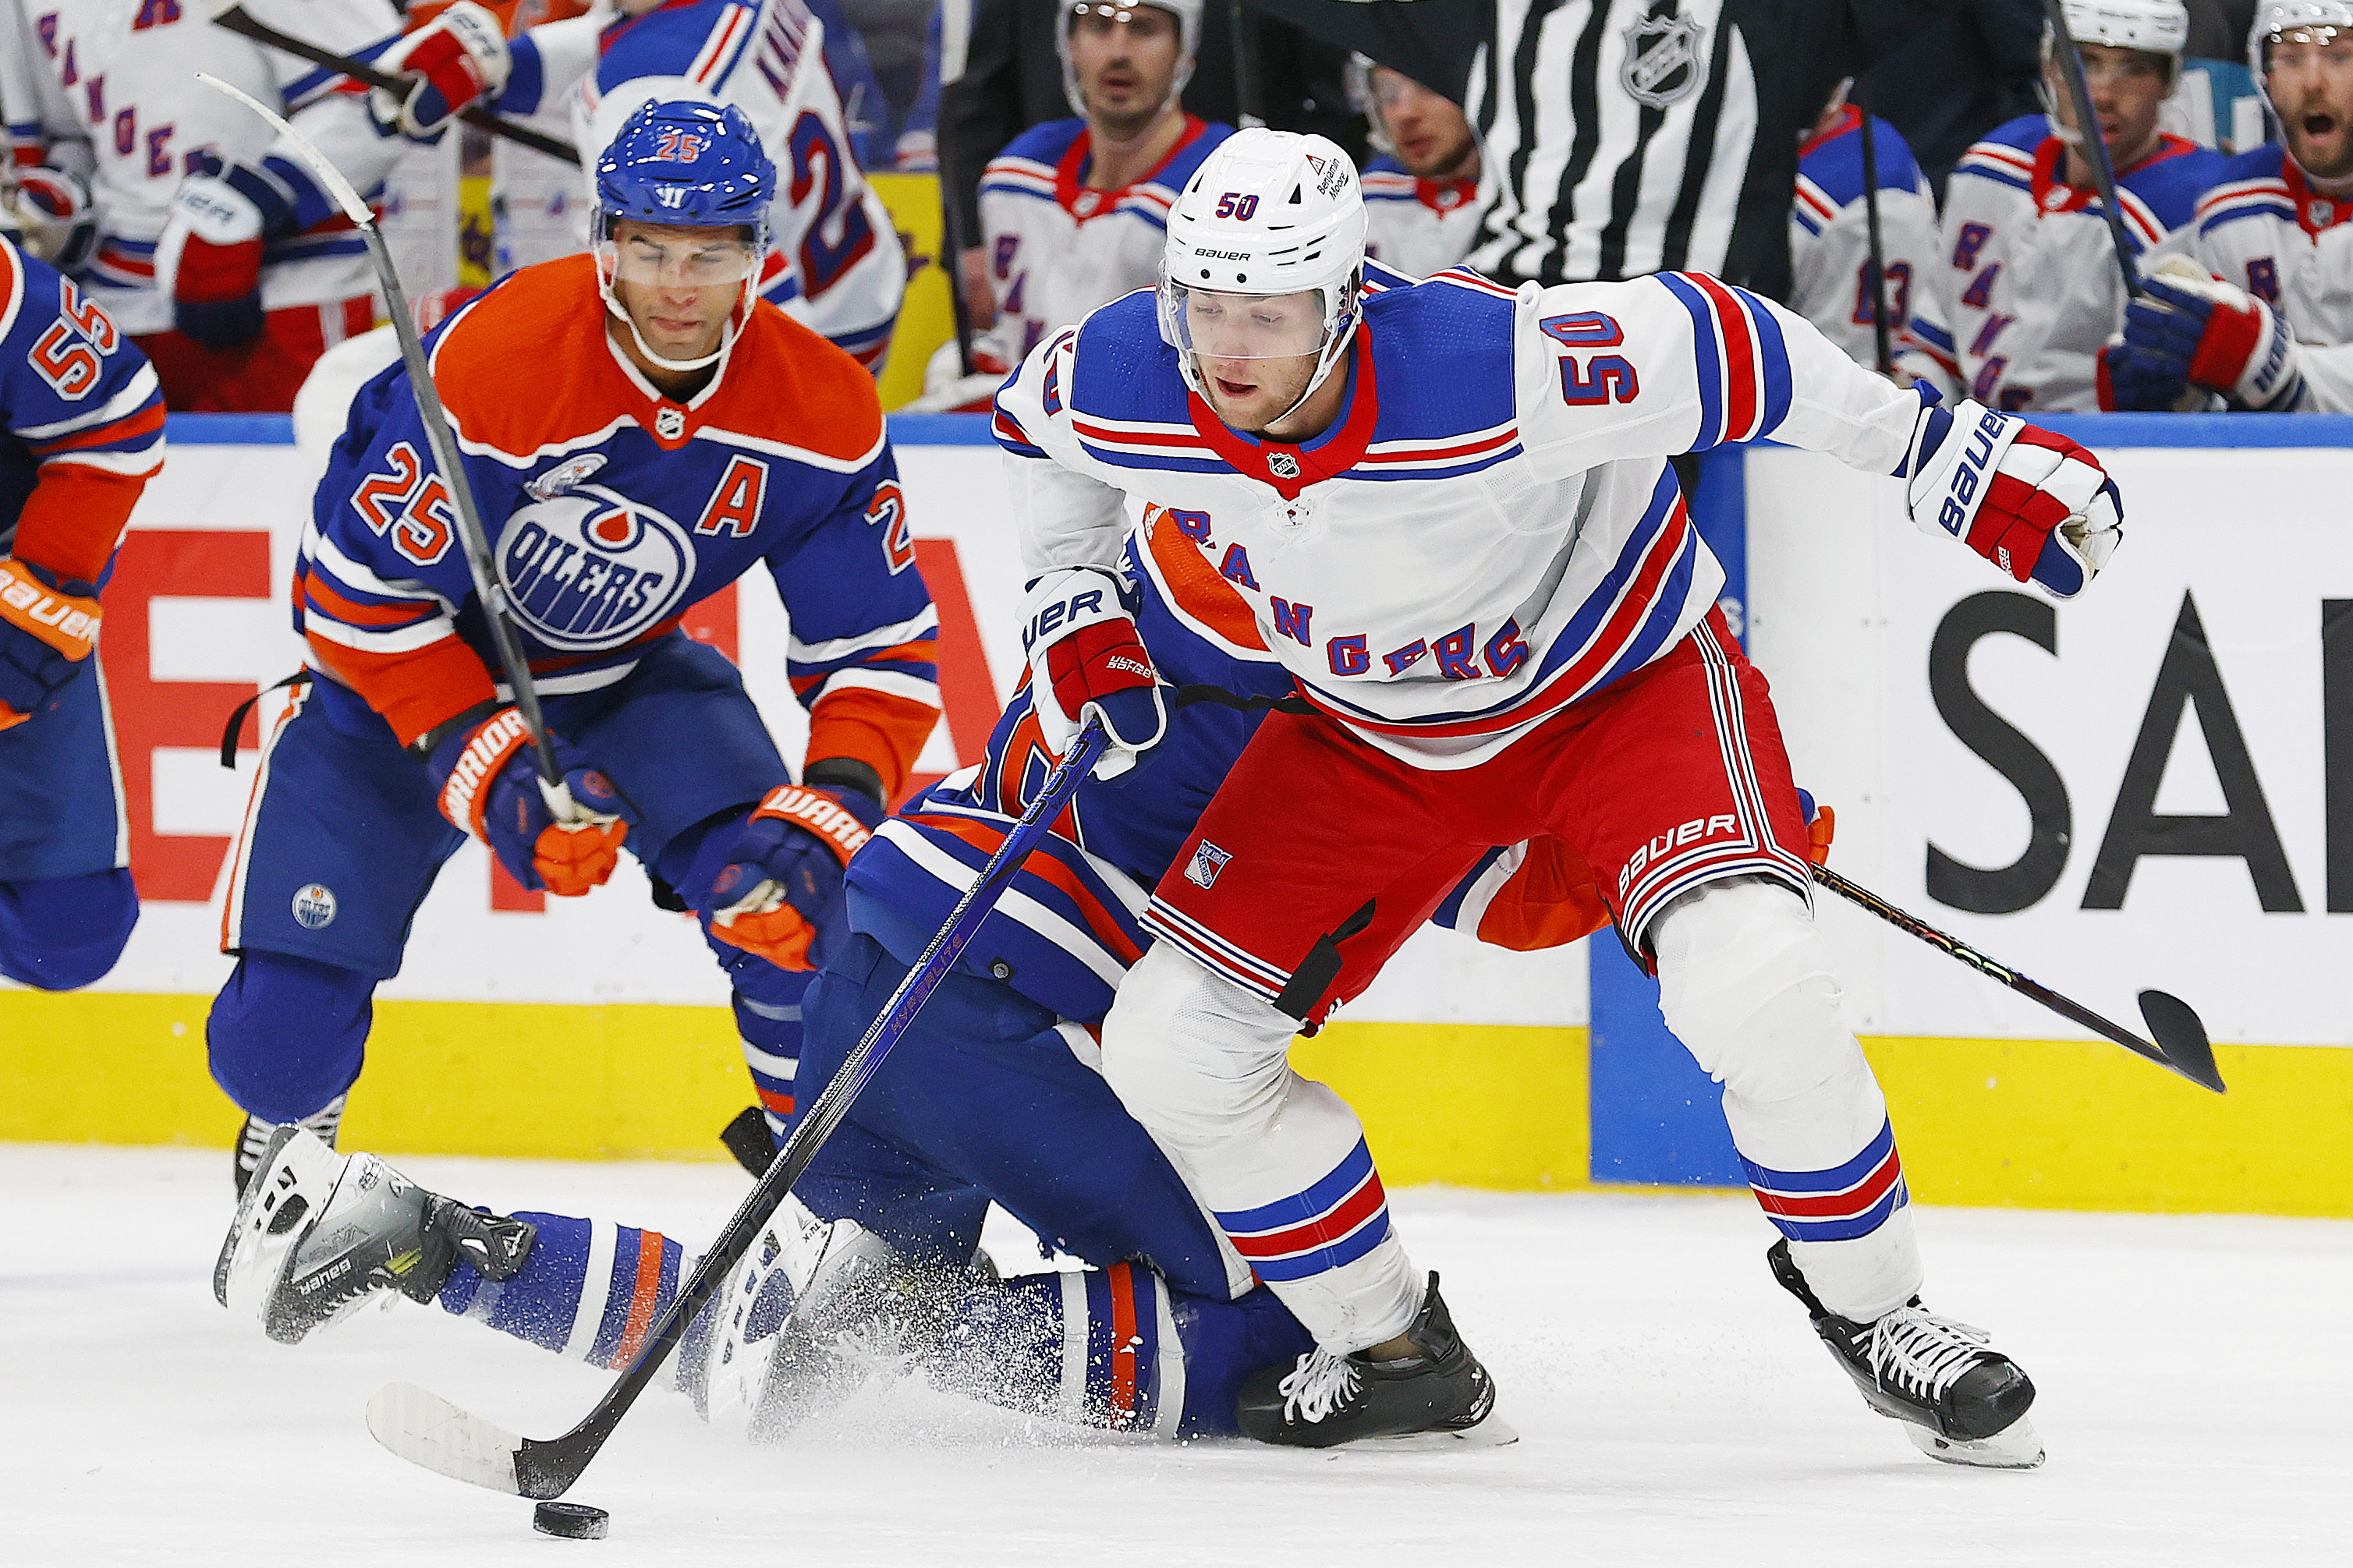 New York Rangers forward Will Cuylle (5) moves the puck around Edmonton Oilers forward Connor Brown (28) and defensemen Darnell Nurse (25) during the second period at Rogers Place